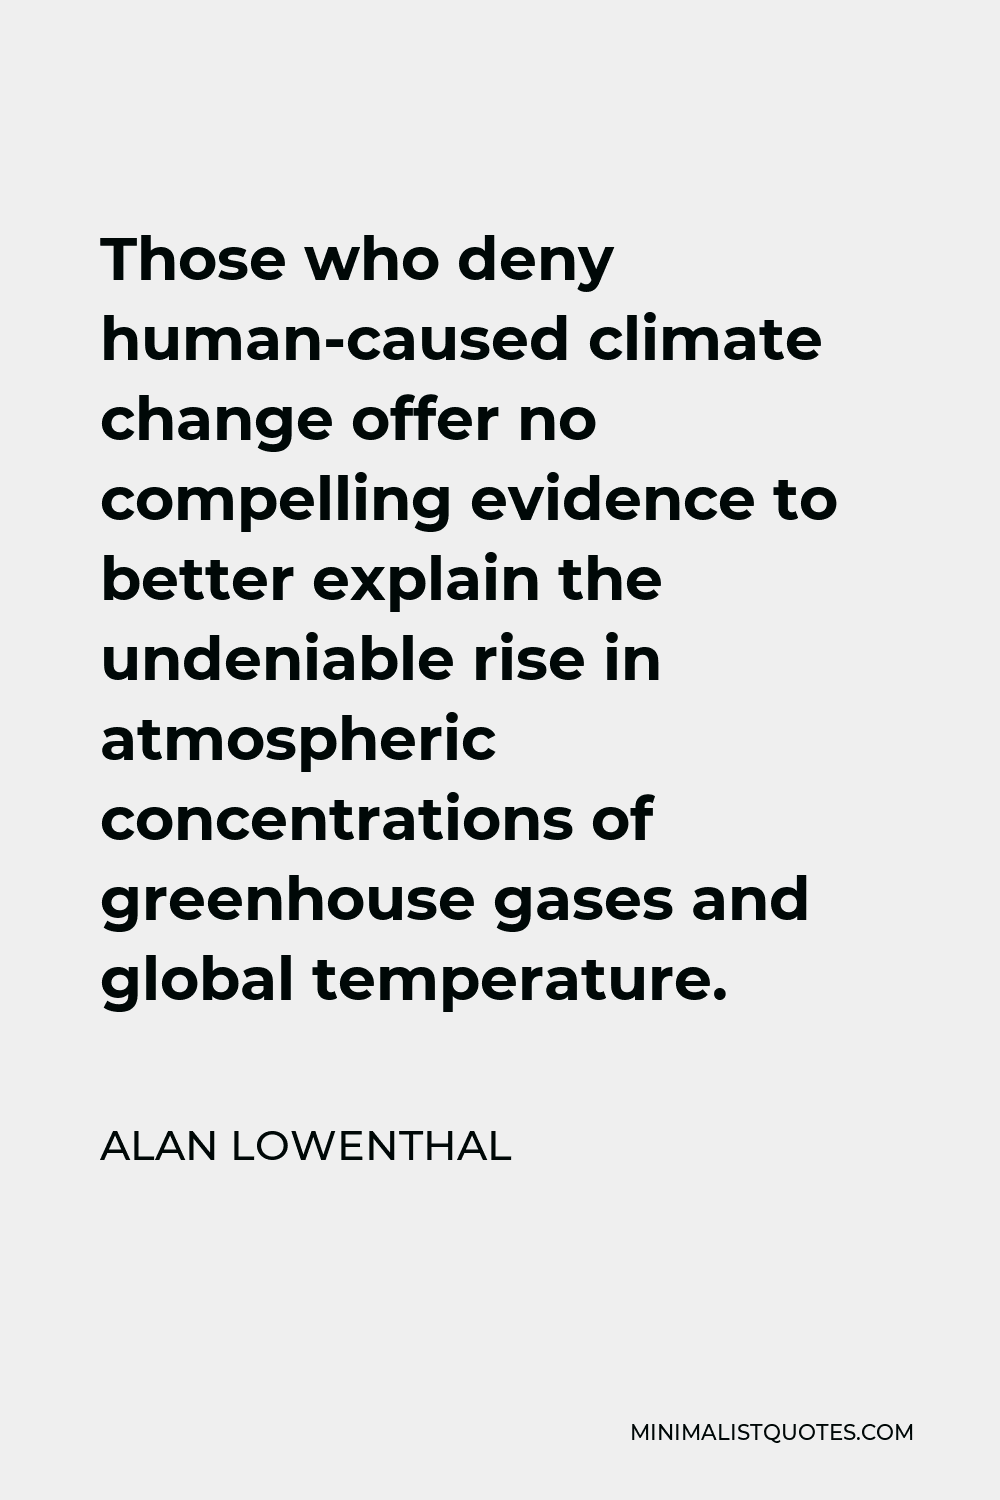 Alan Lowenthal Quote - Those who deny human-caused climate change offer no compelling evidence to better explain the undeniable rise in atmospheric concentrations of greenhouse gases and global temperature.